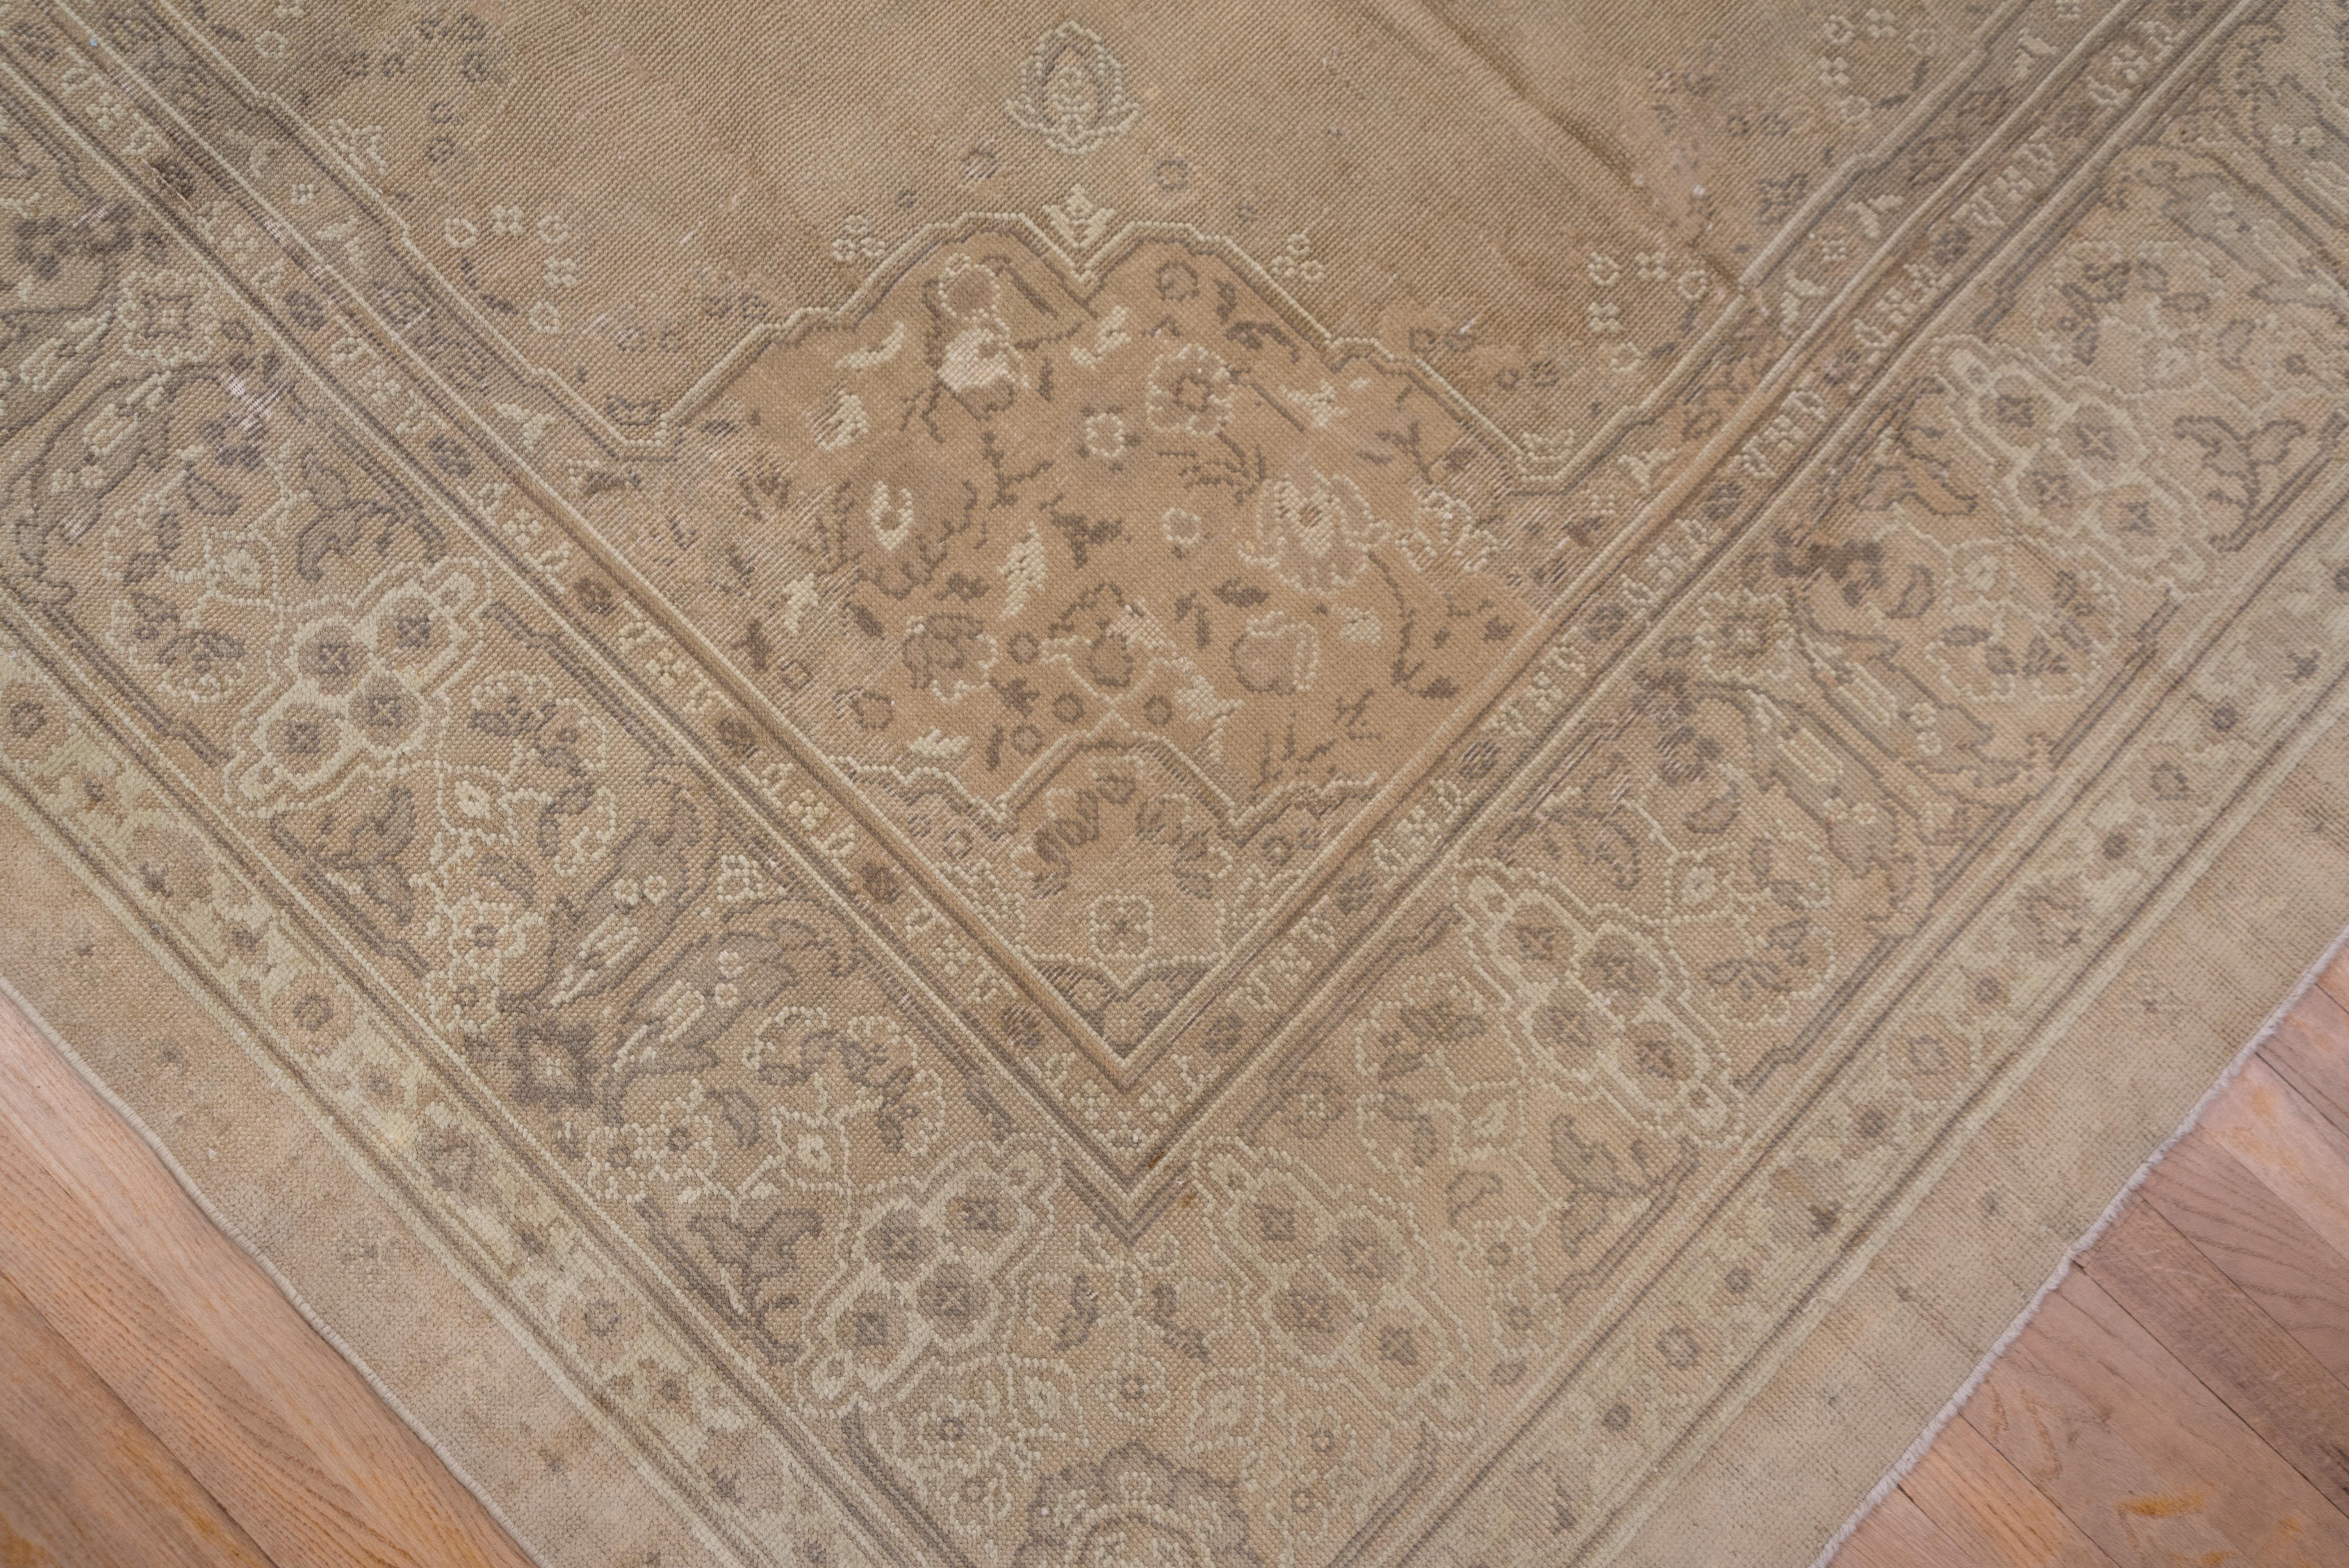 The open straw-buff field displays a doubly pendanted, scalloped cream medallion with a palmette and flowerhead infill. Doubled leaf and cartouche pattern main border. Softer decorative palette makes the room look larger. Medium urban weave. Good